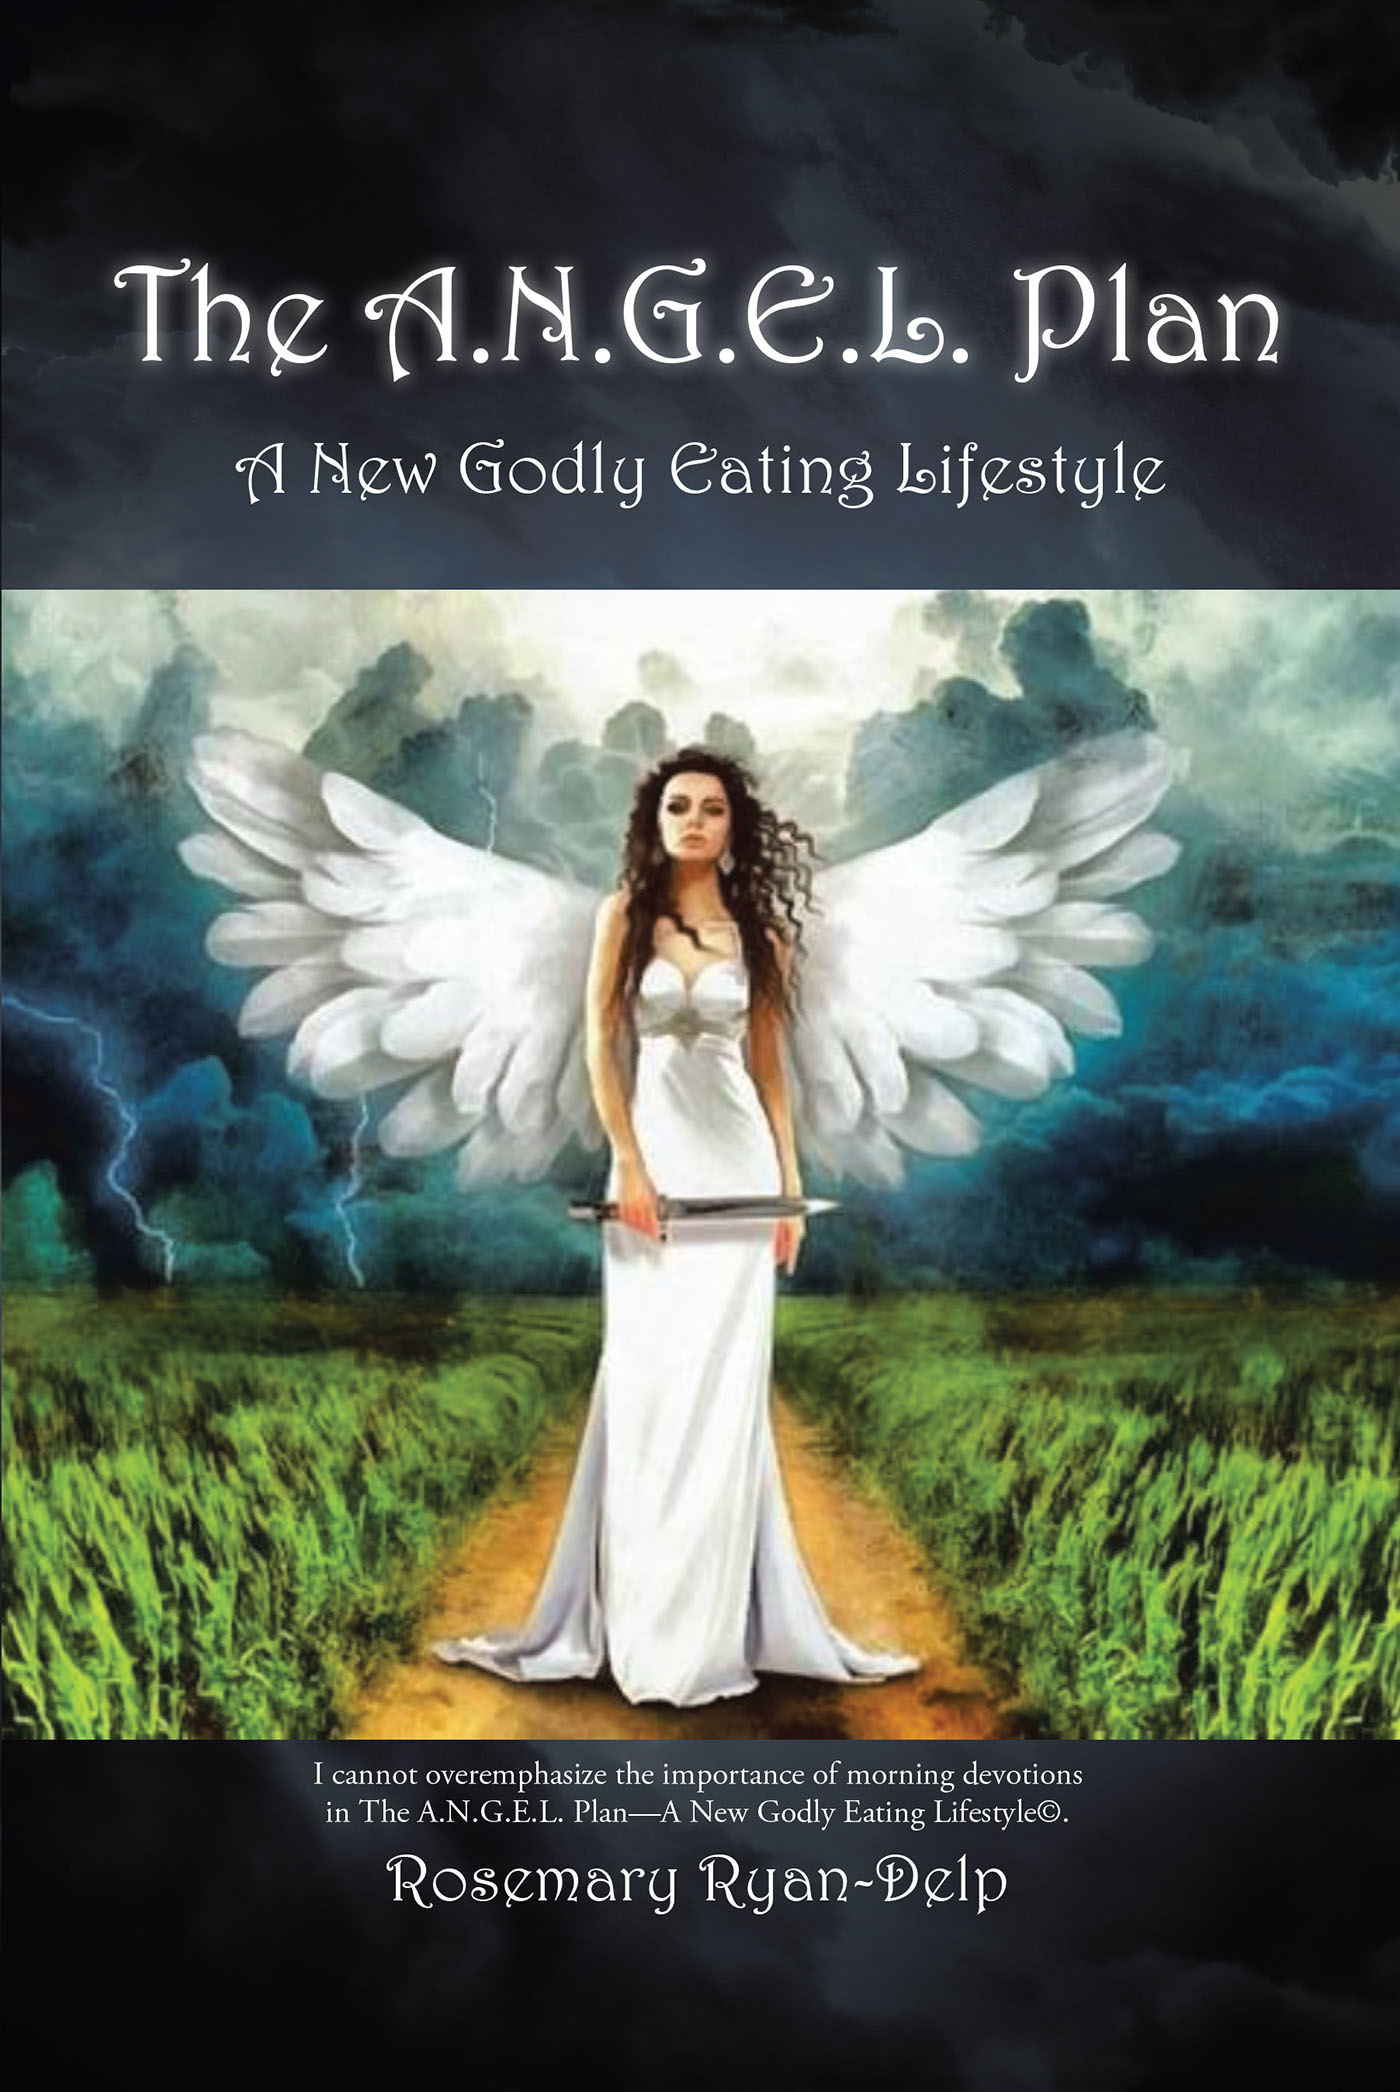 Rosemary Ryan-Delp’s Newly Released “The A.N.G.E.L. Plan: A New Godly Eating Lifestyle” is a Christian Guide to a Godly Eating Lifestyle